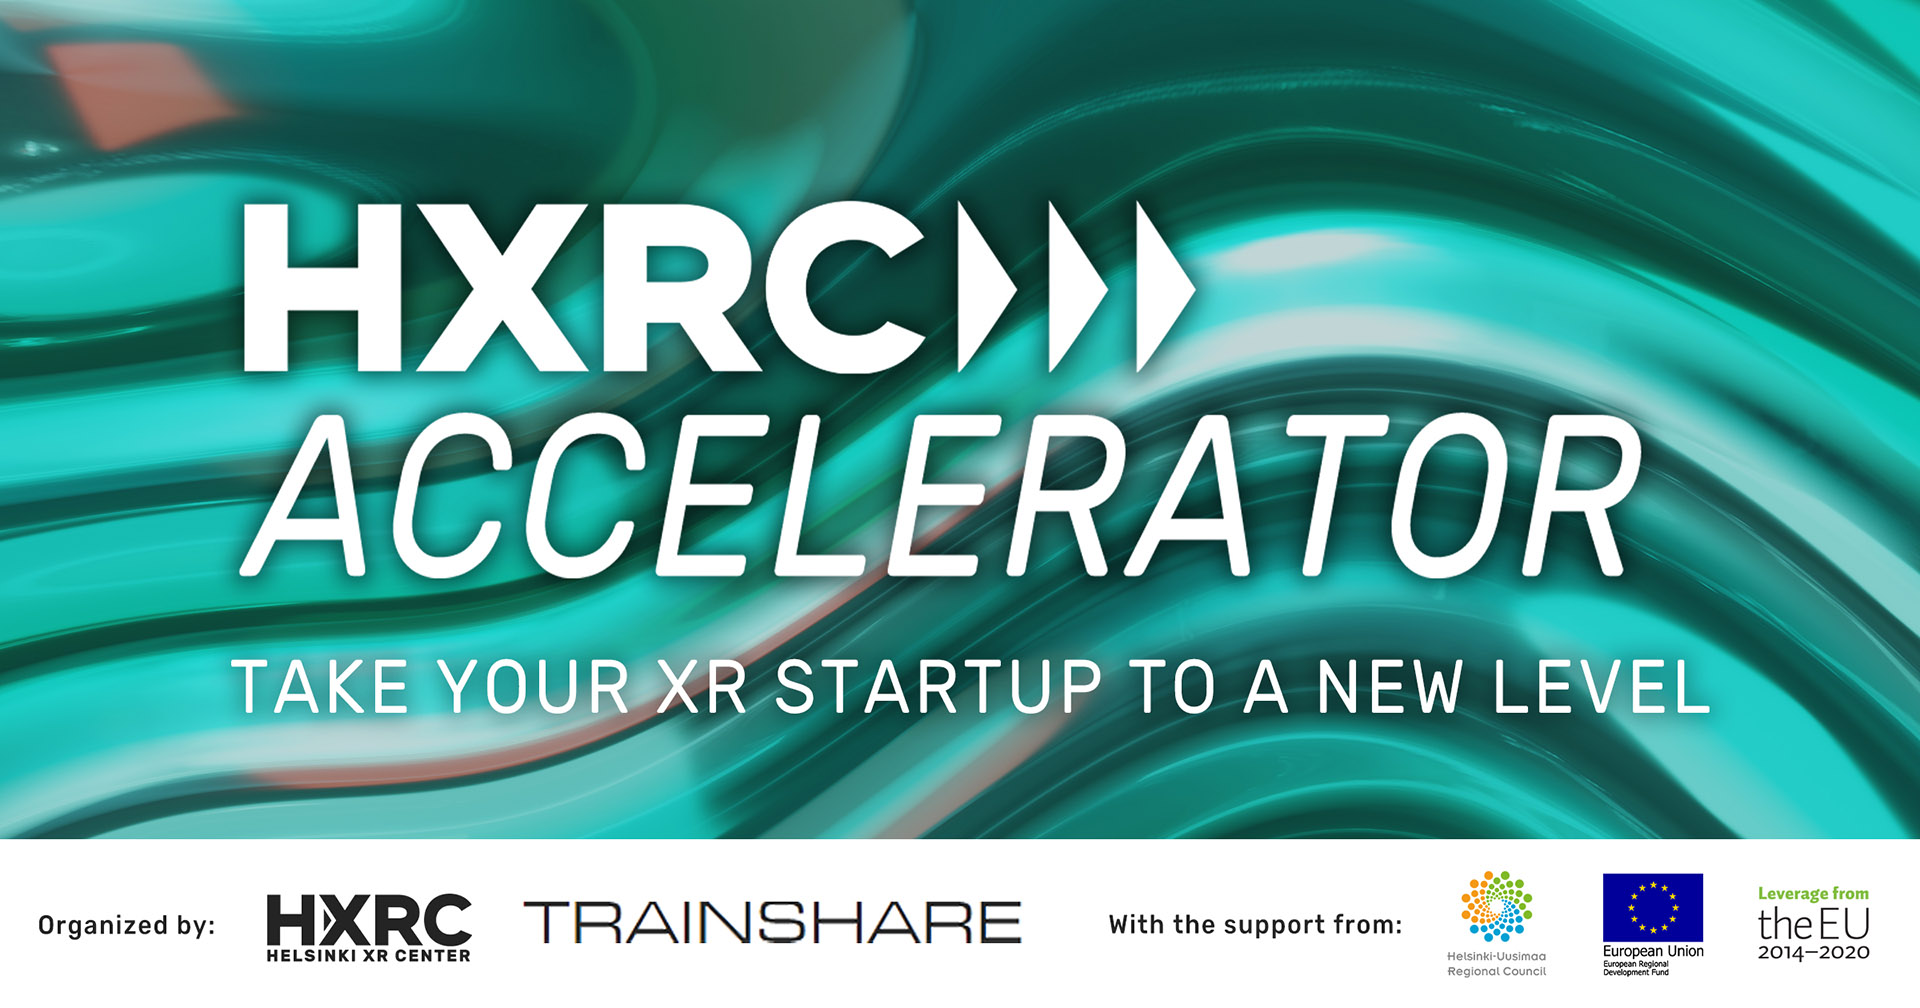 HXRC Accelerator is taking Finnish XR startups to a new level.